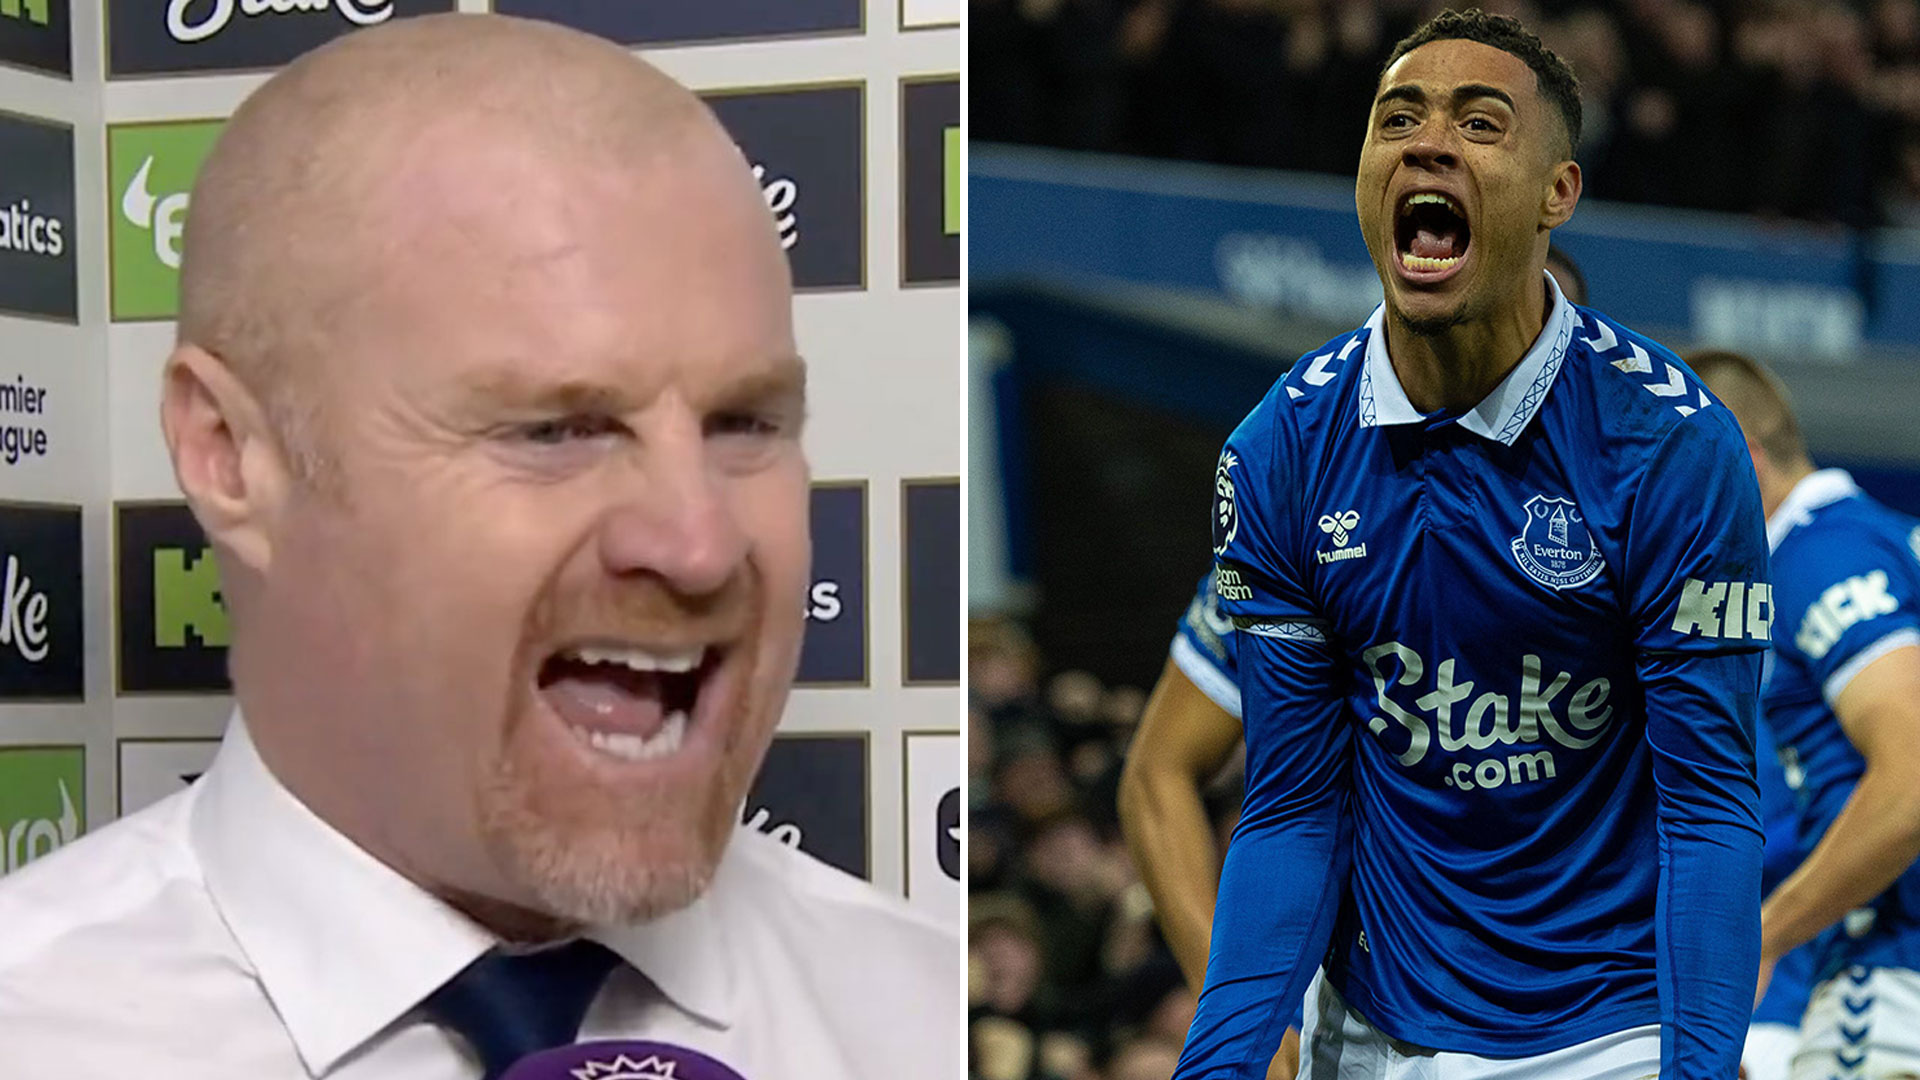 Fans in stitches as Sean Dyche ‘goes peak Sean Dyche’ reacting to Lewis Dobbin scoring first Everton goal vs Chelsea